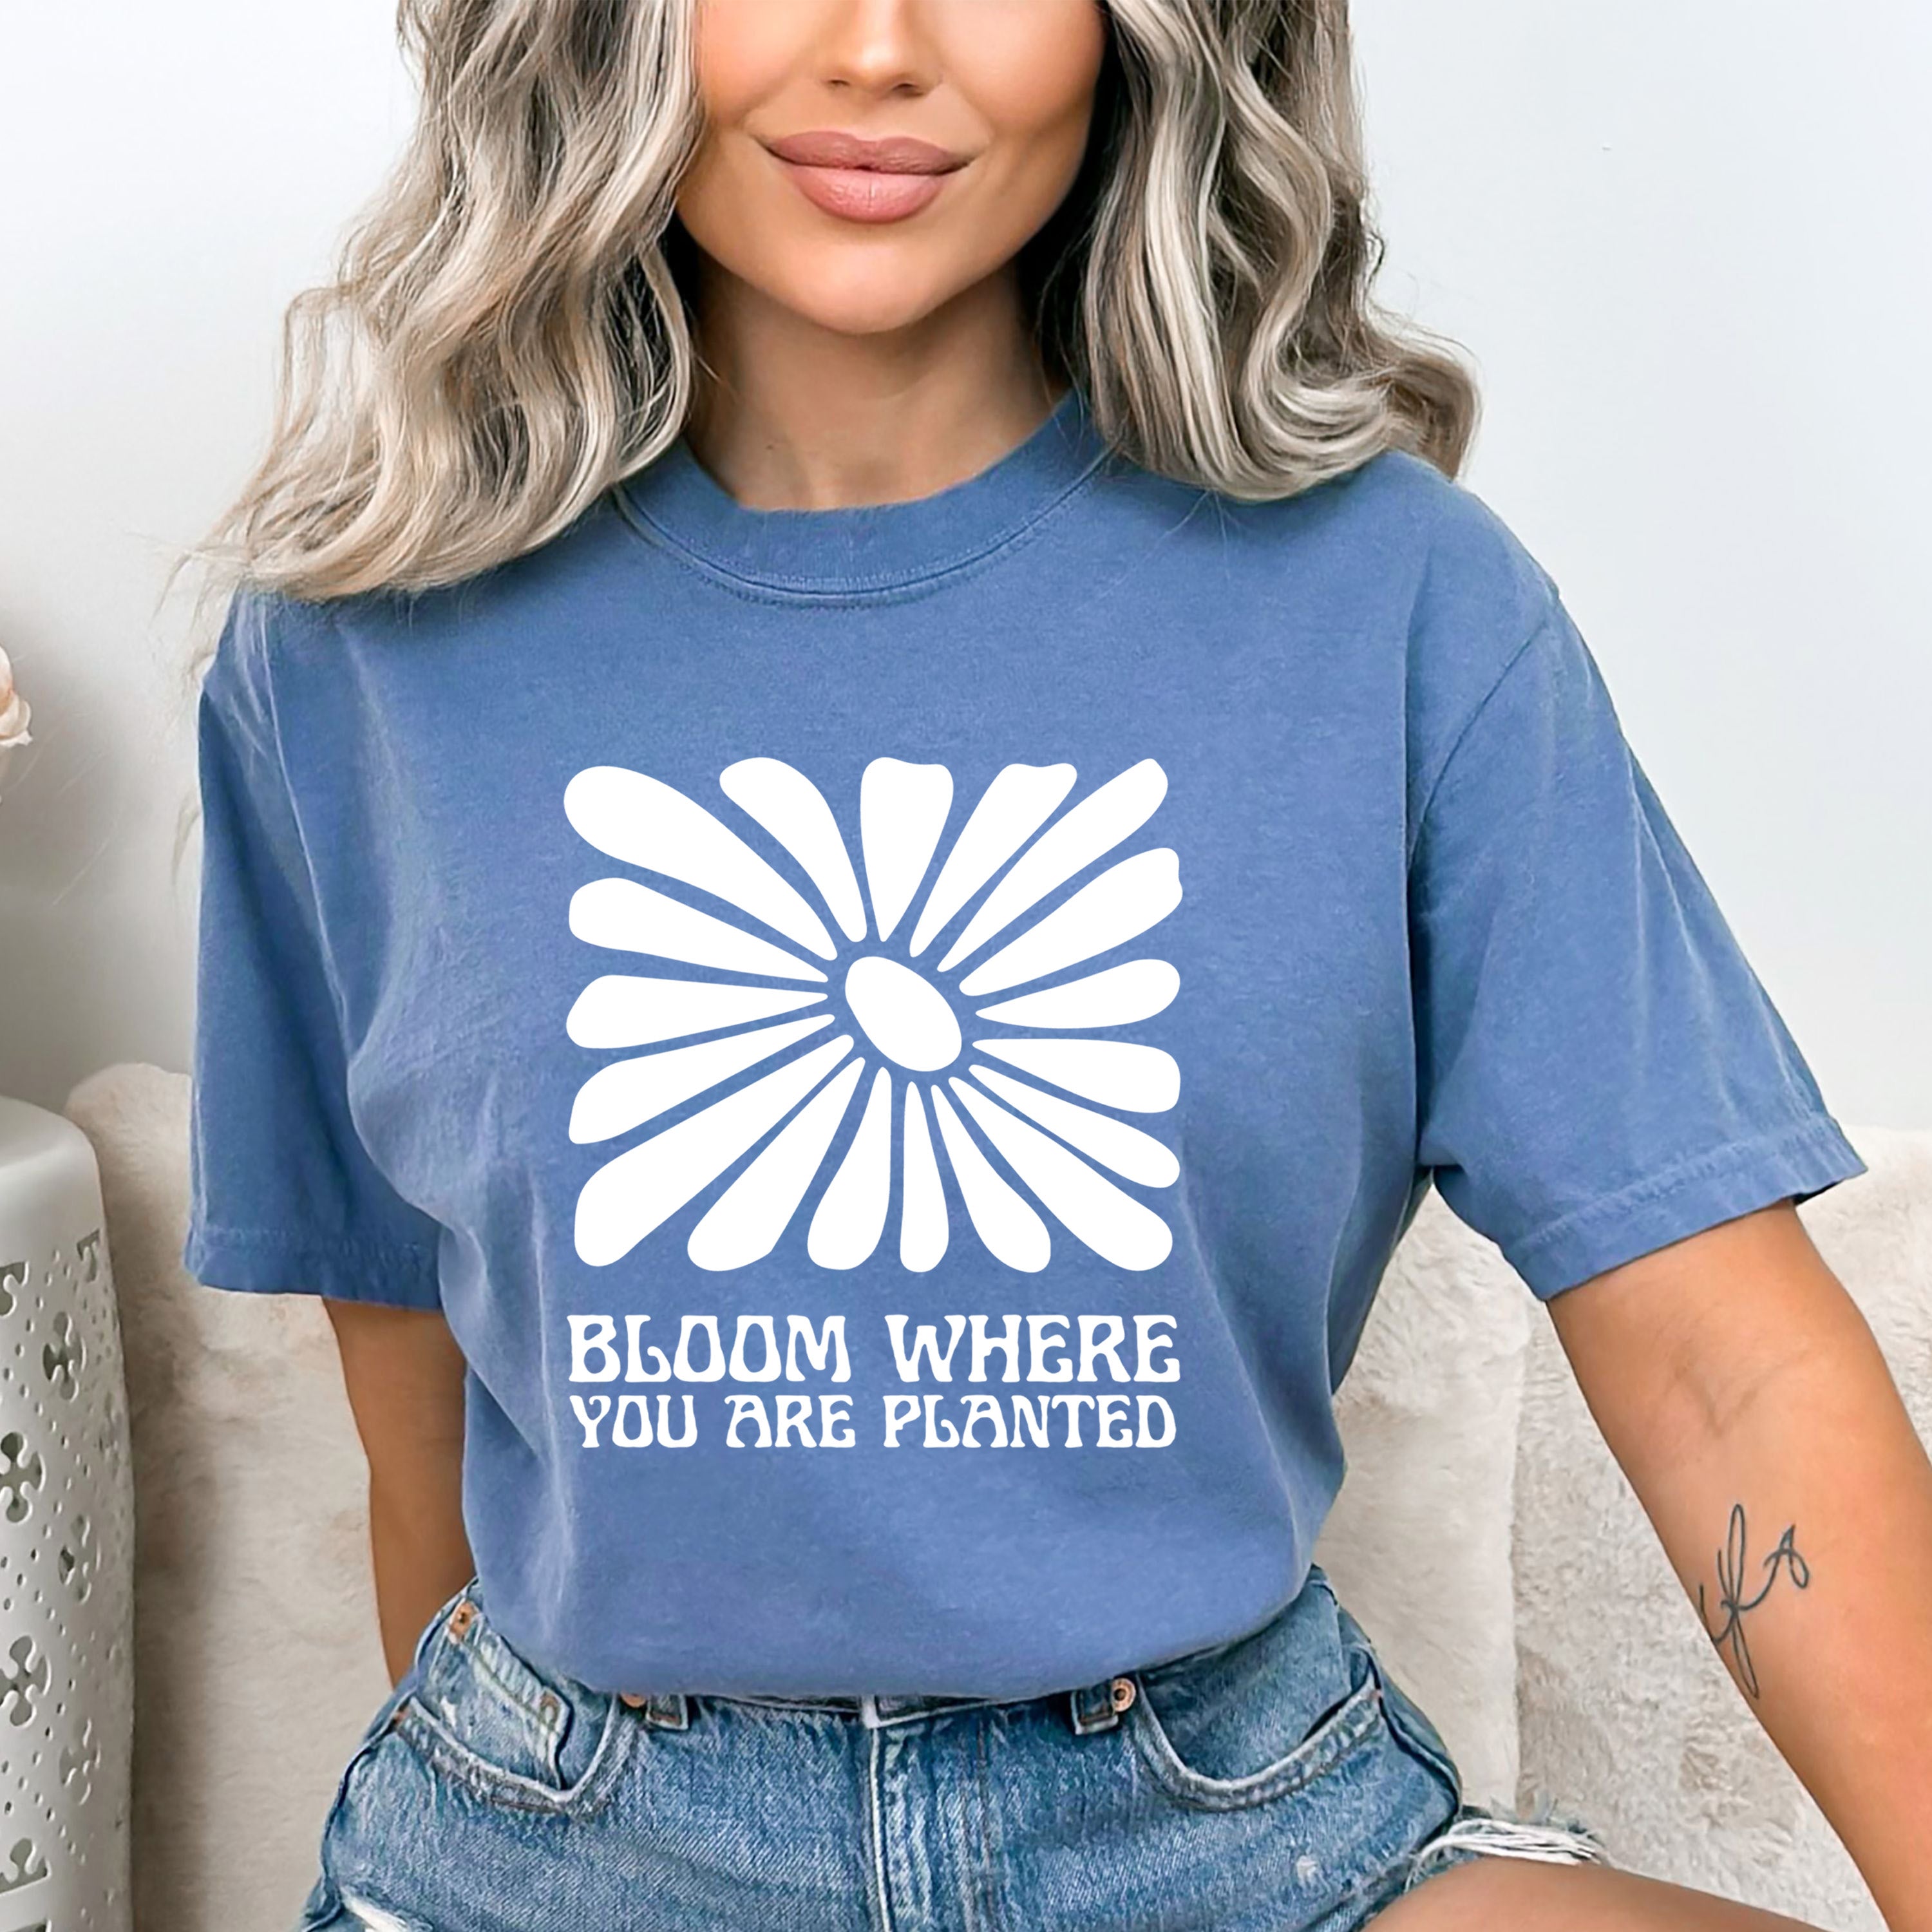 Bloom Where You Are Planted - Bella canvas